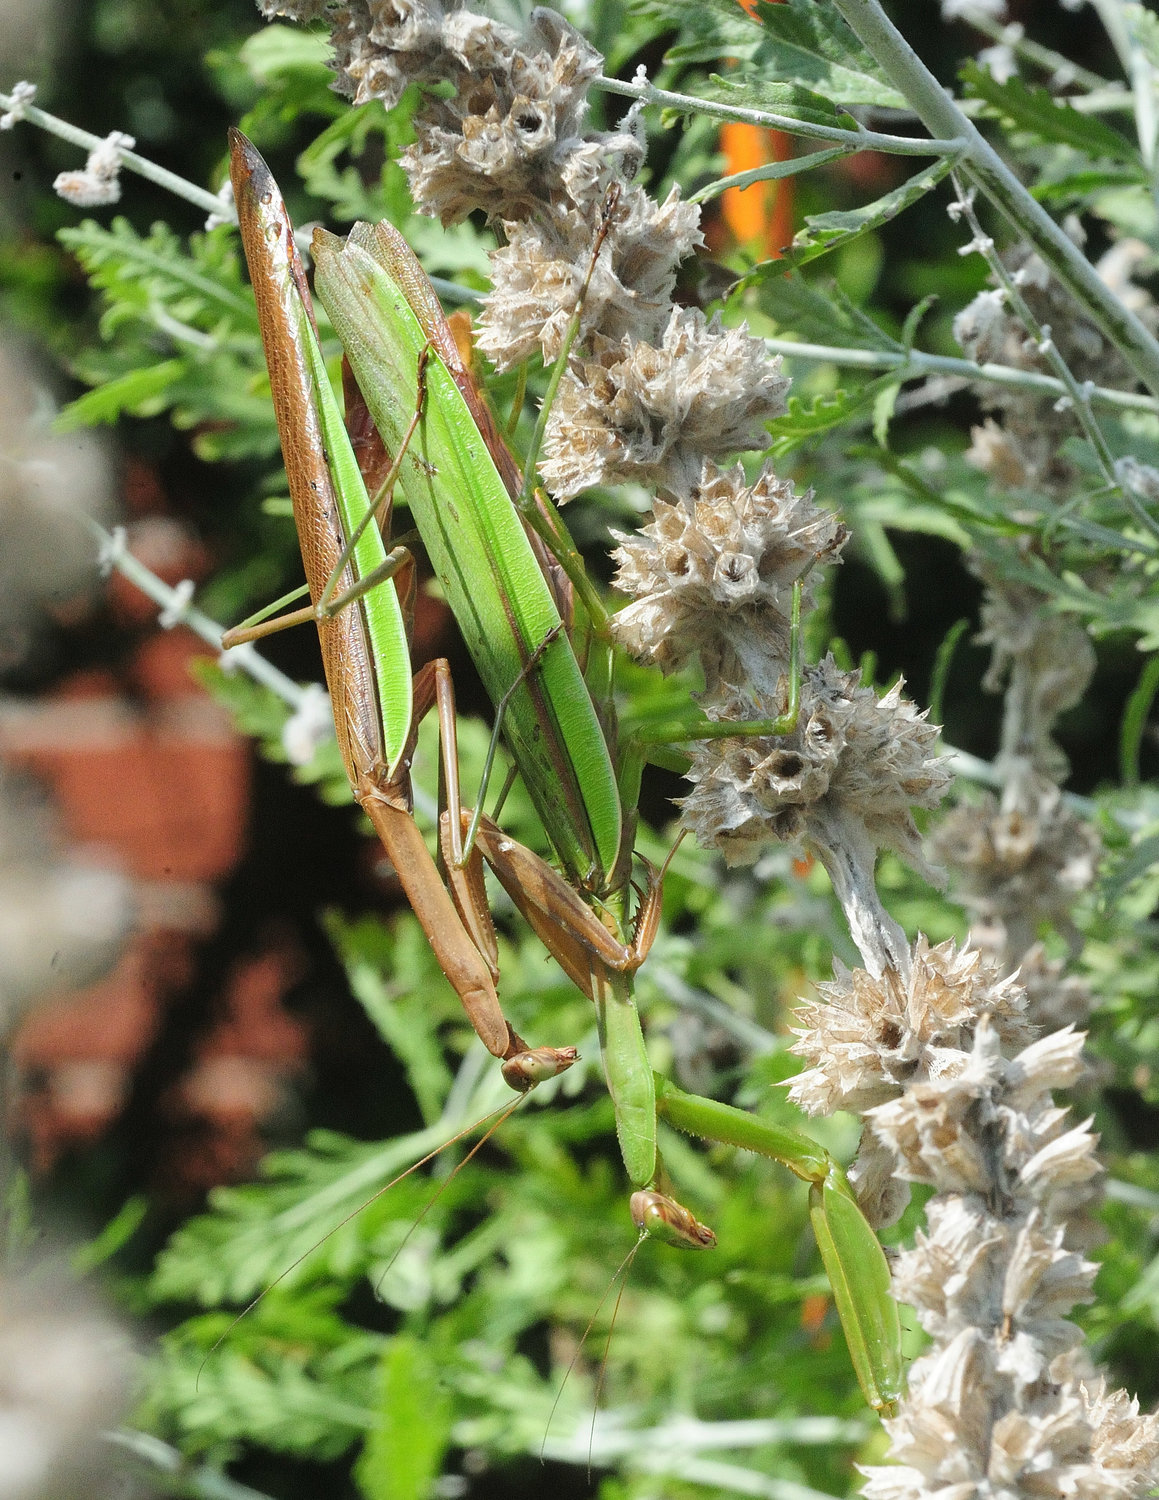 This is a pair of mantises found in Shohola on September 18. The male is to the left and on top of the female. This pair was coupled for at least 20 minutes. Female mantids are slightly larger than the males and display a distended abdomen due to its egg mass during late summer.